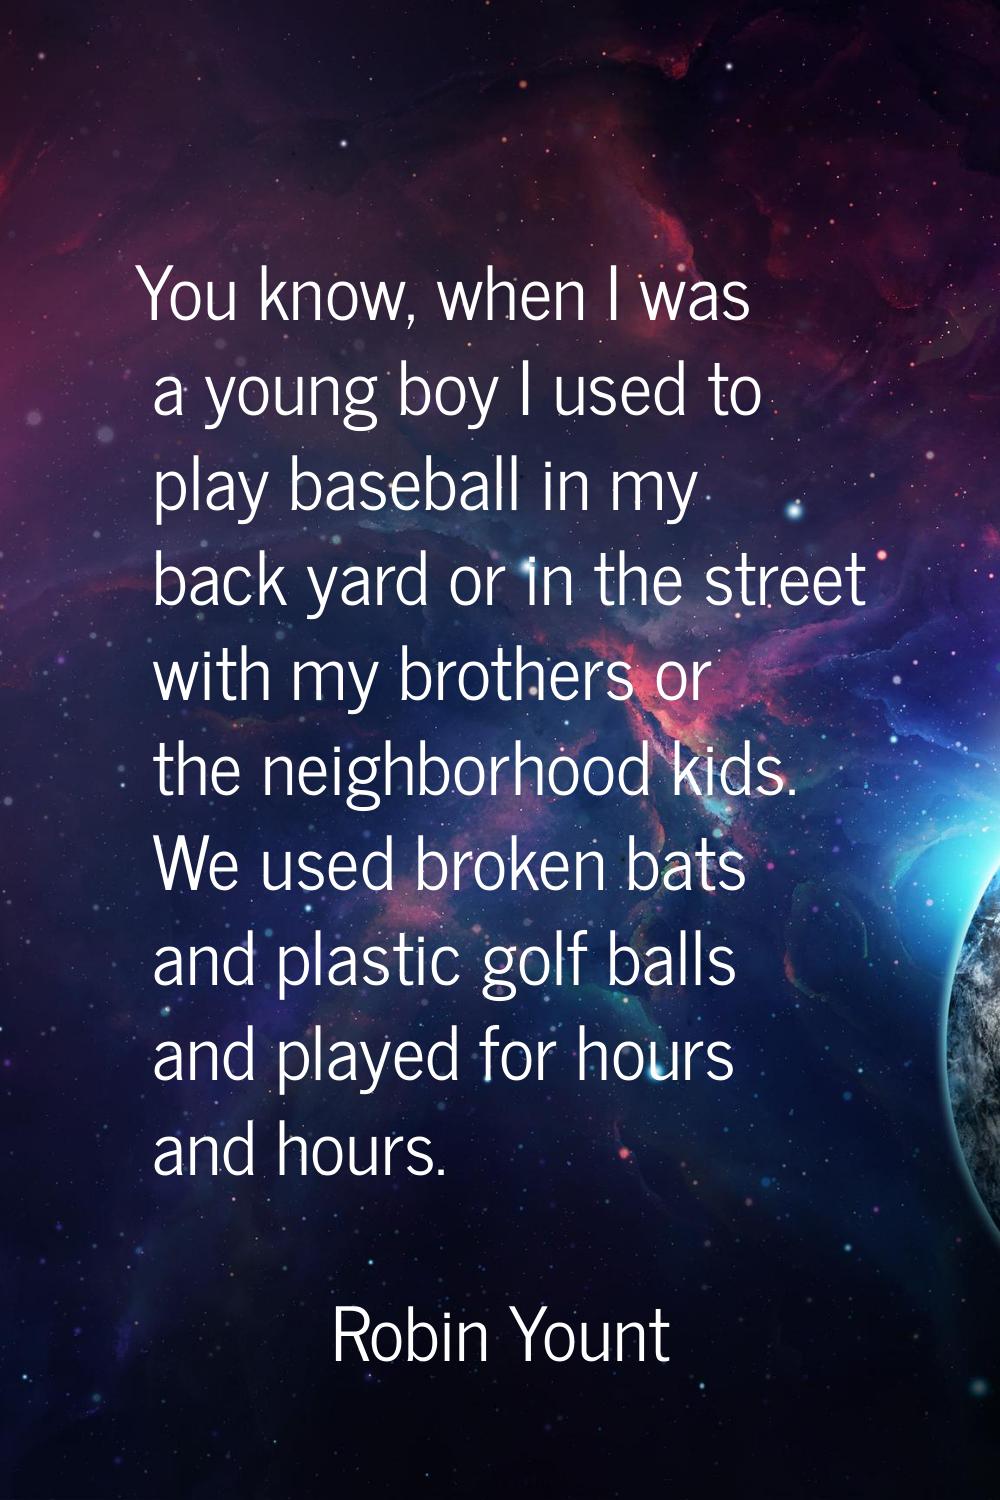 You know, when I was a young boy I used to play baseball in my back yard or in the street with my b